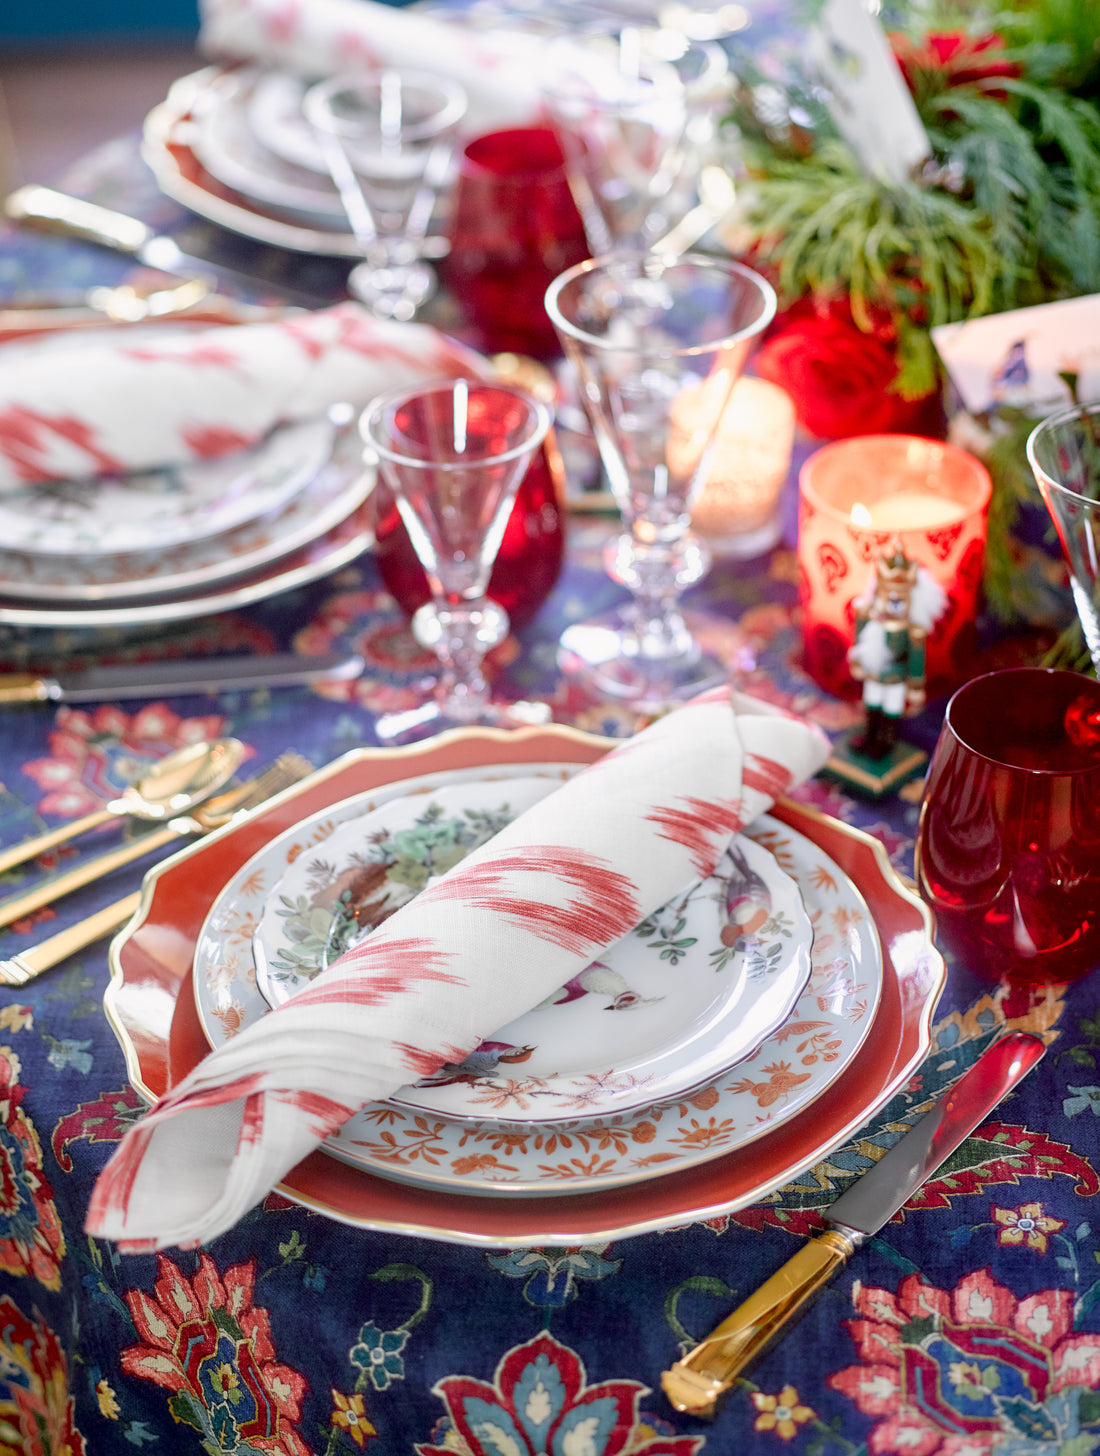 Top 10 Tips for Entertaining this Holiday Season